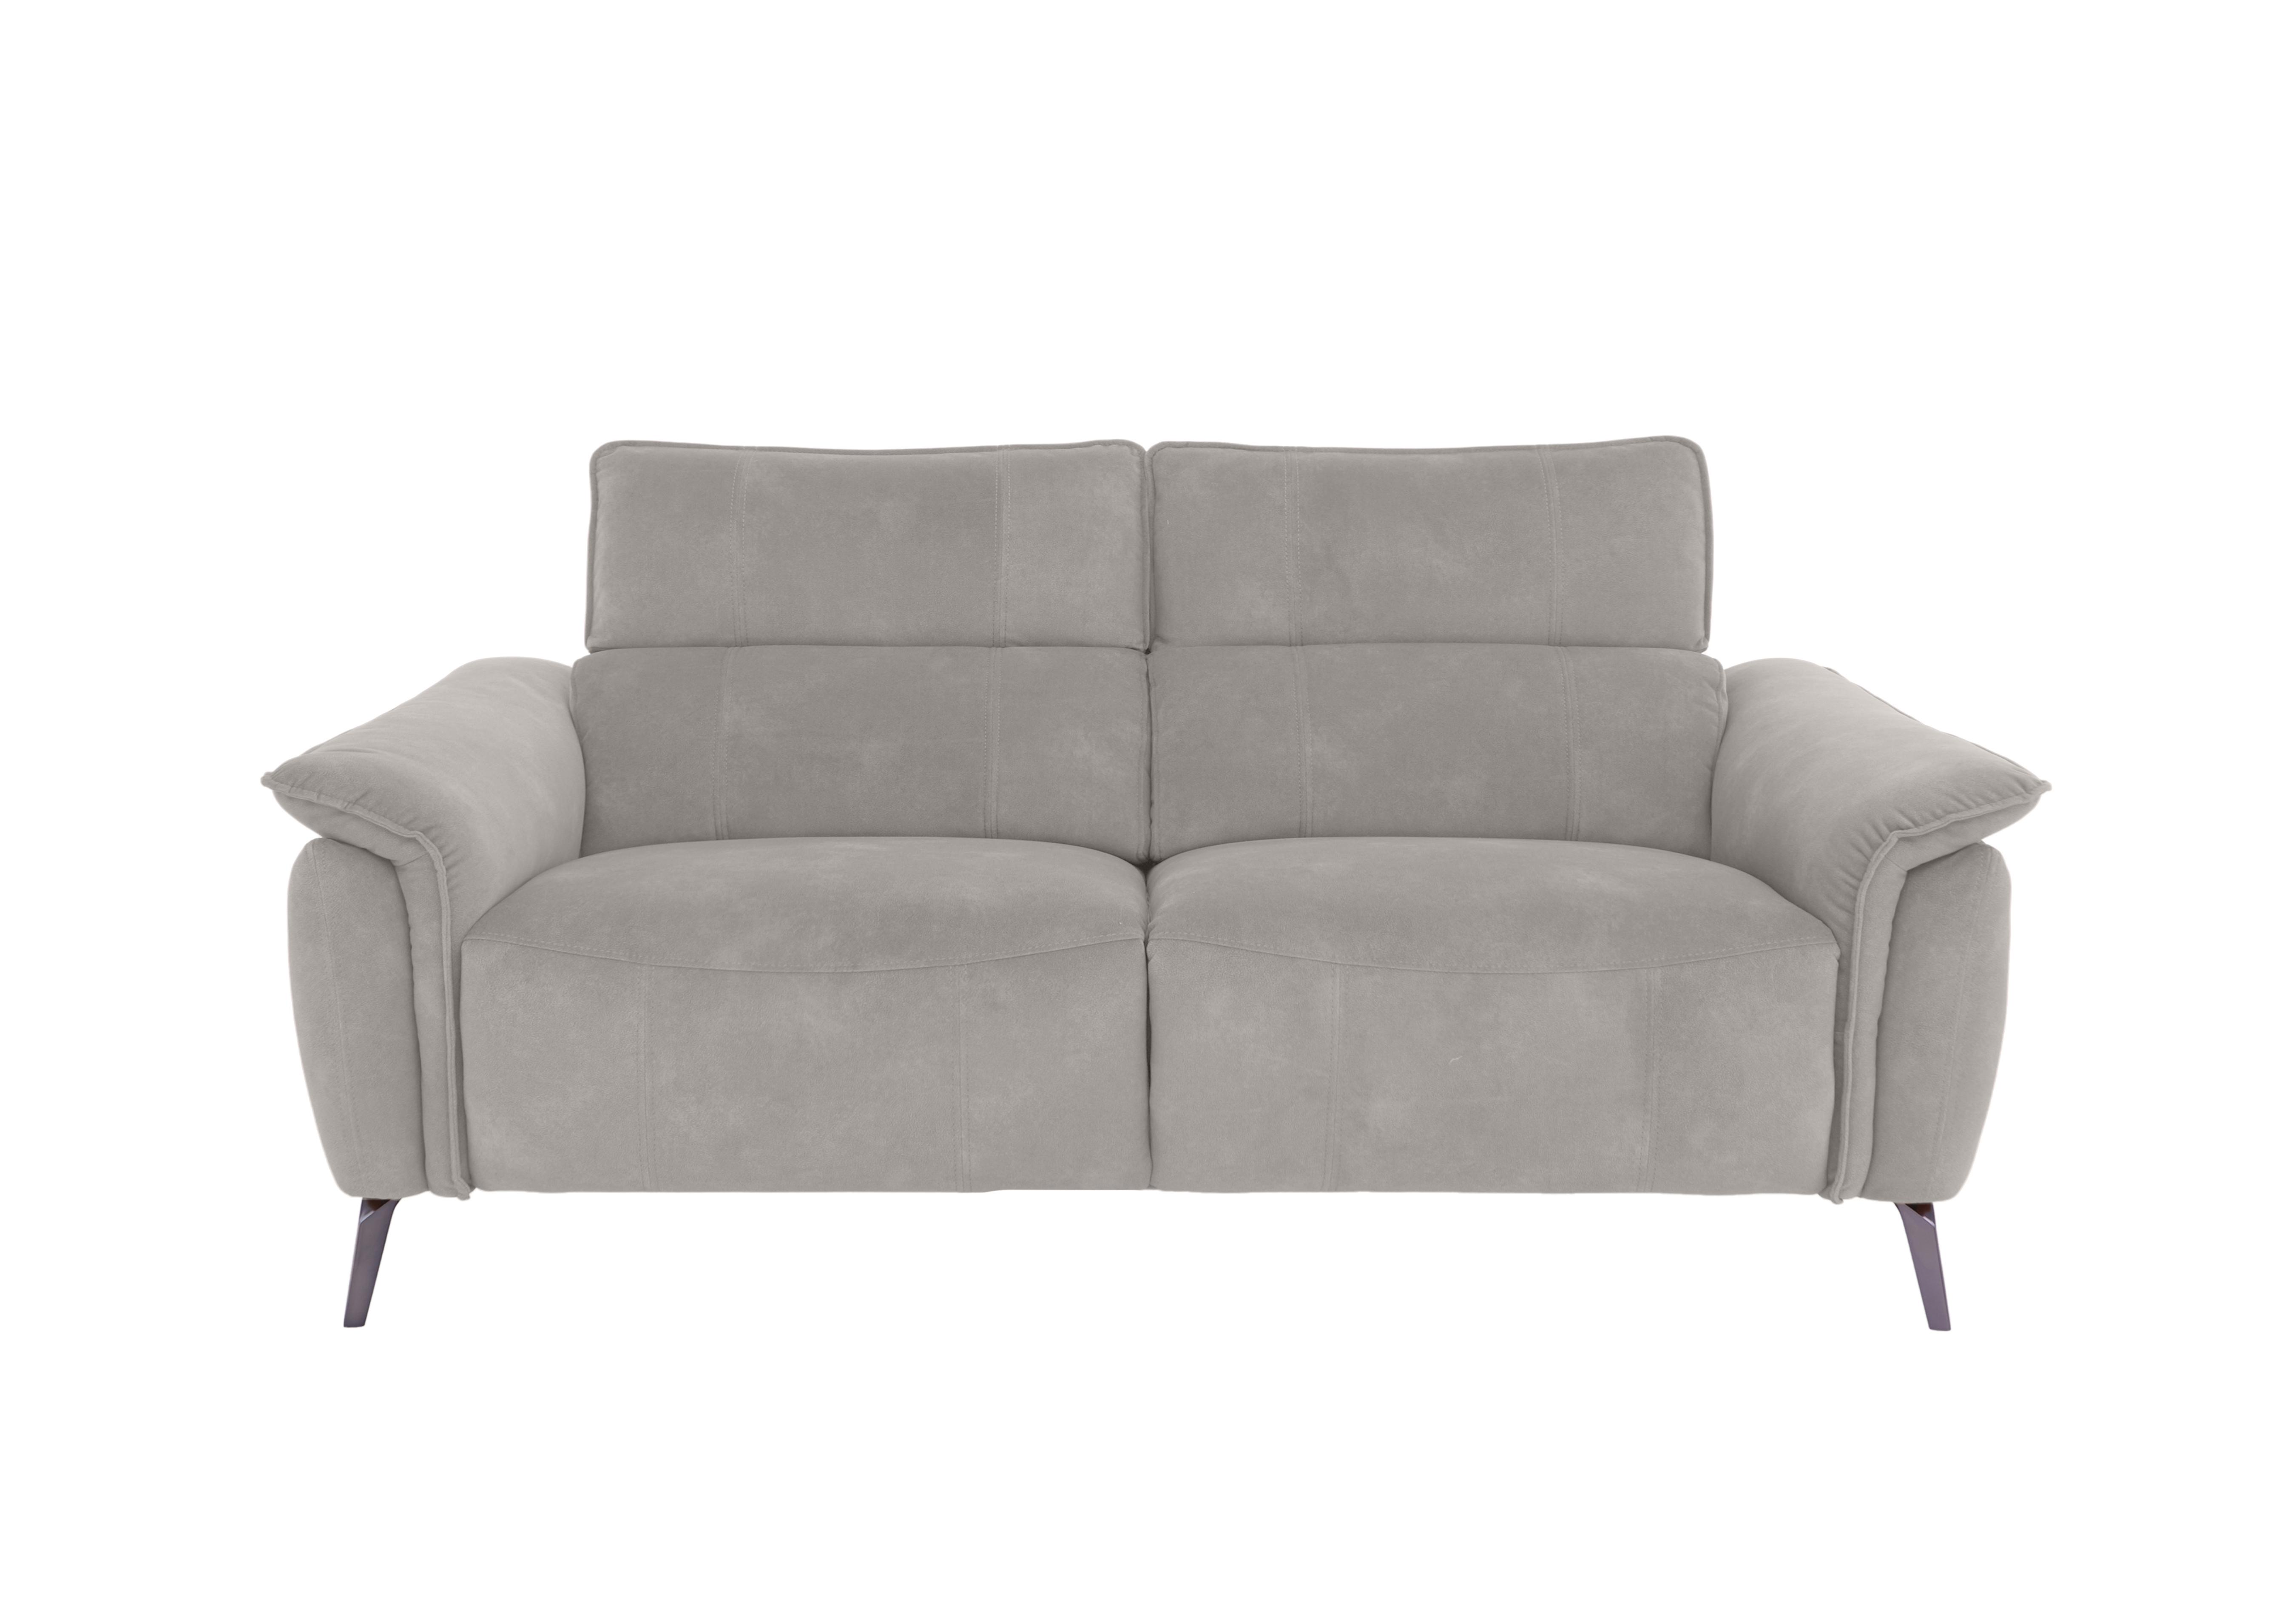 Jude 3 Seater Fabric Sofa in Stone Dexter 02 43502 on Furniture Village